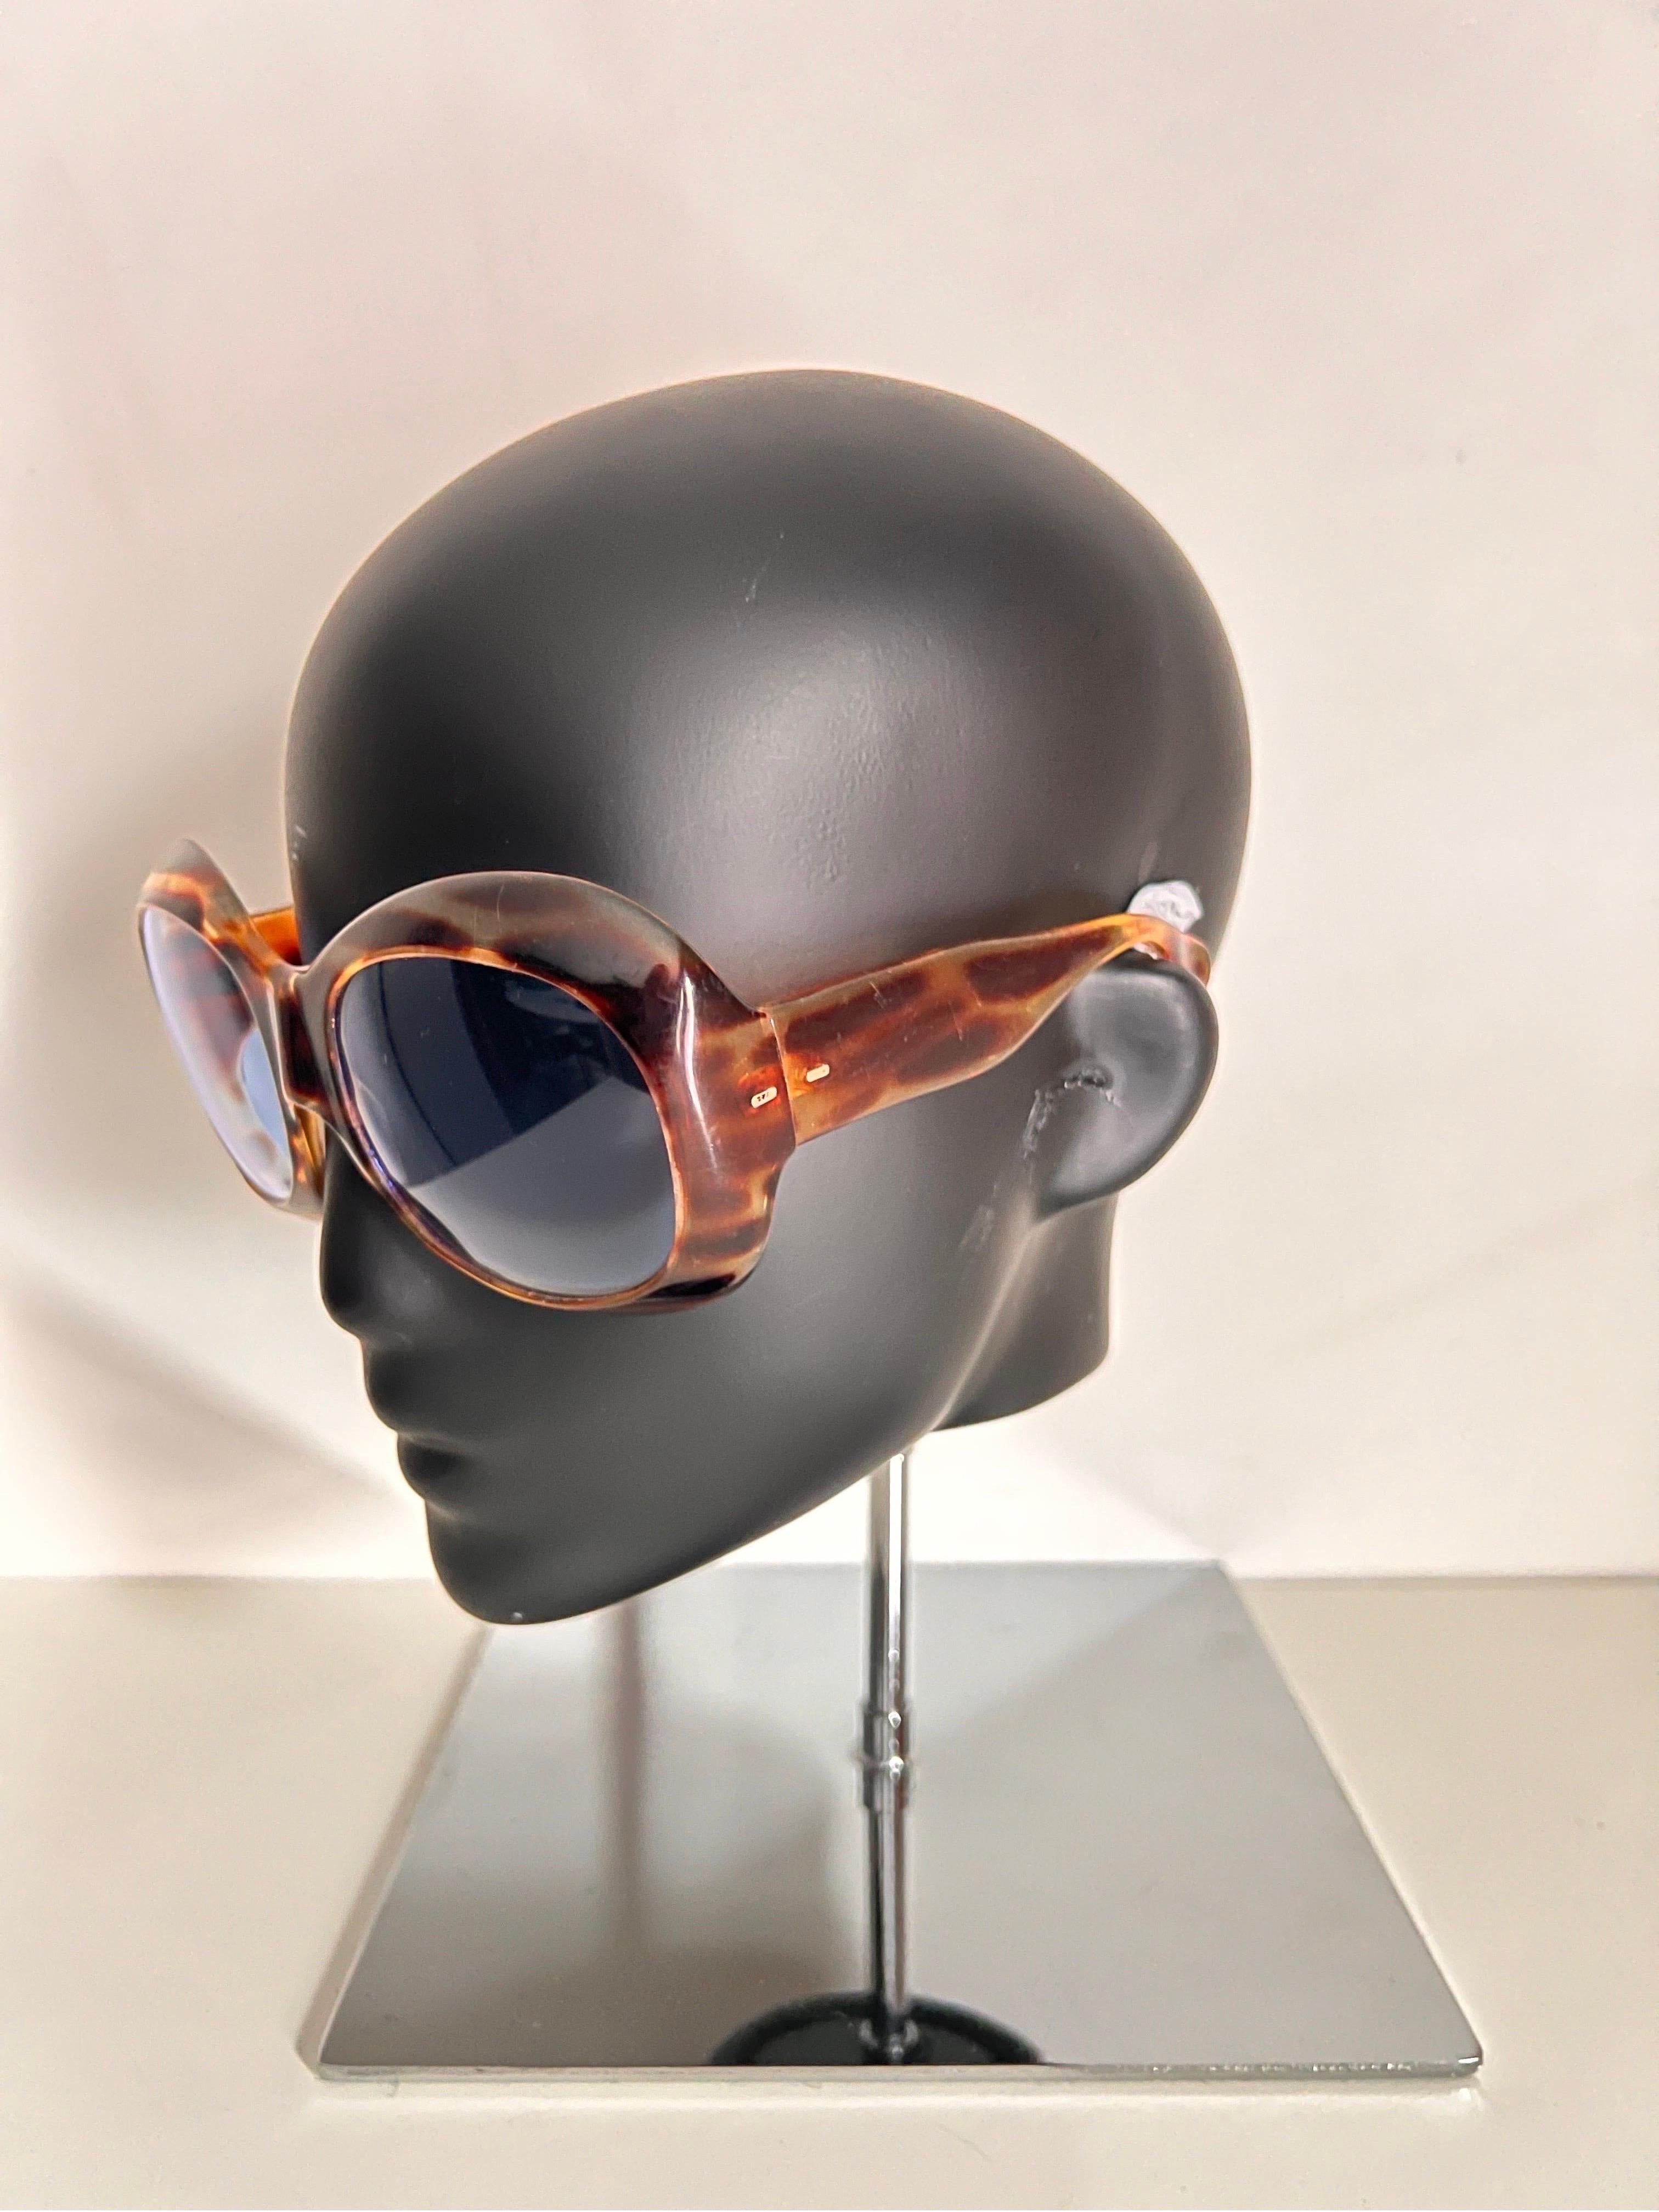 Super chic and oversized vintage 1970’s sunglasses in faux tortoiseshell pattern with cool blue lenses

Stunning style, pattern and shape

Made in Italy (labelled)

We can imagine Jackie O of the early 70’s wearing these and looking fantastic and